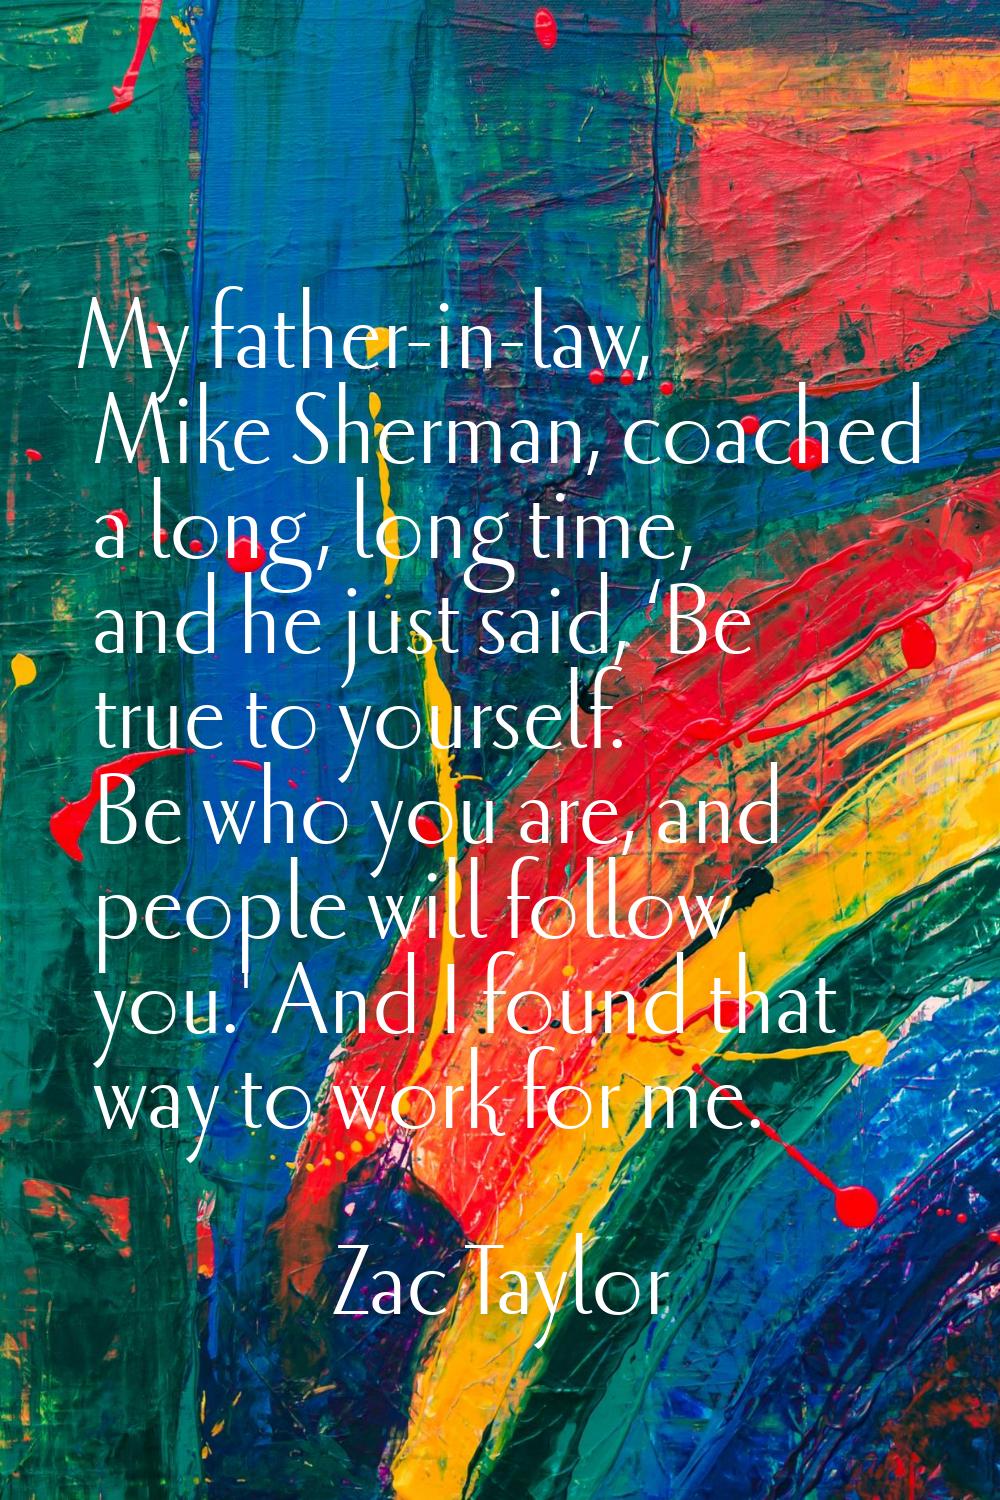 My father-in-law, Mike Sherman, coached a long, long time, and he just said, ‘Be true to yourself. 